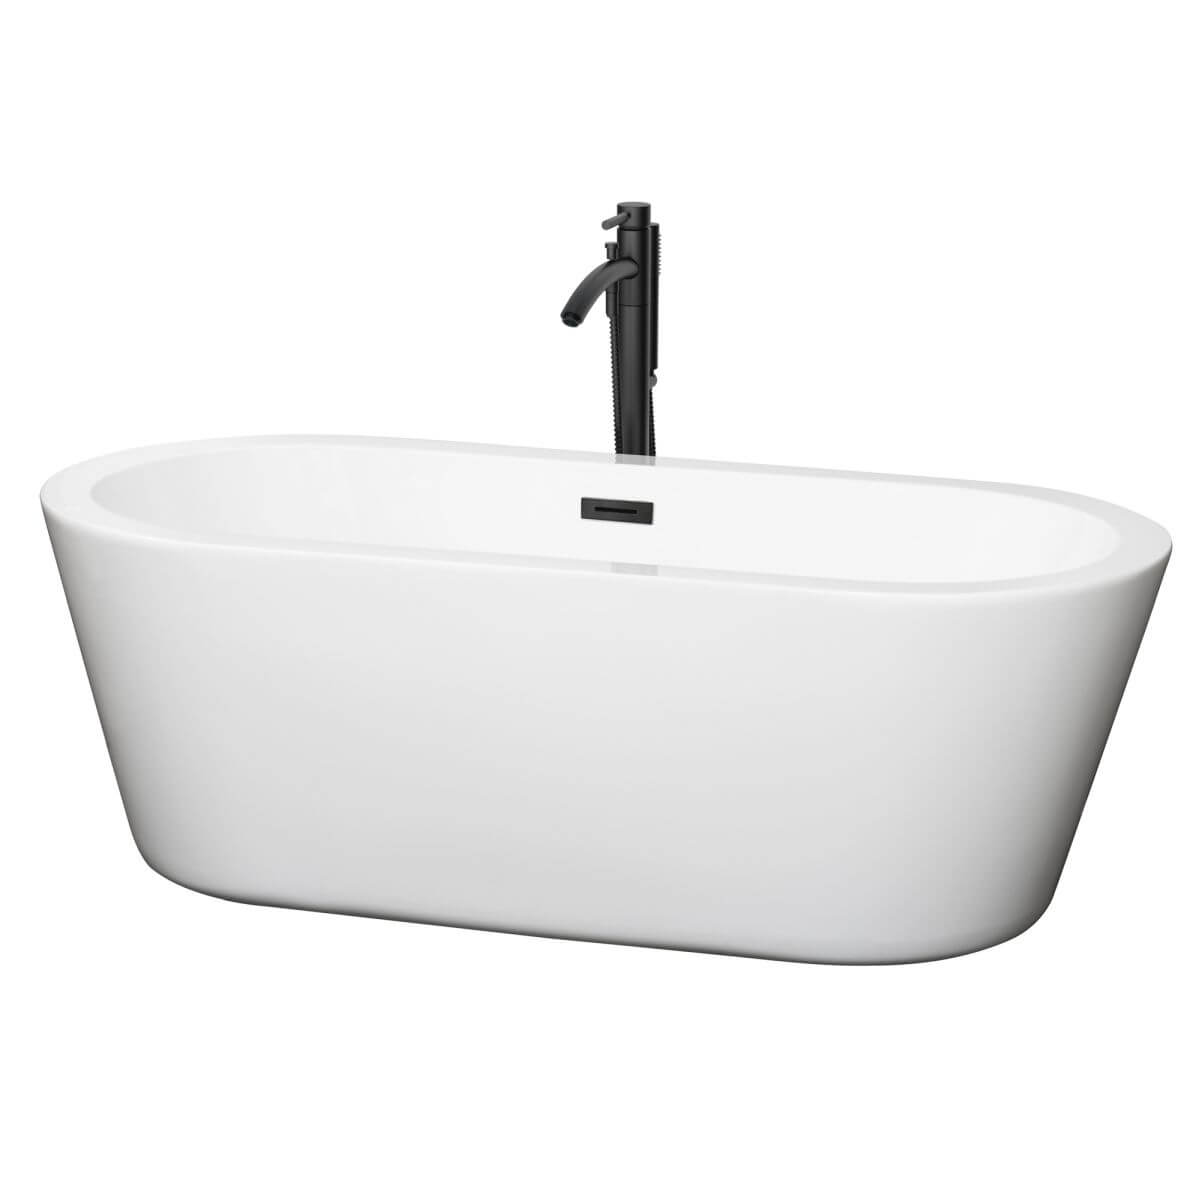 Wyndham Collection Mermaid 67 inch Freestanding Bathtub in White with Floor Mounted Faucet, Drain and Overflow Trim in Matte Black - WCOBT100367MBATPBK